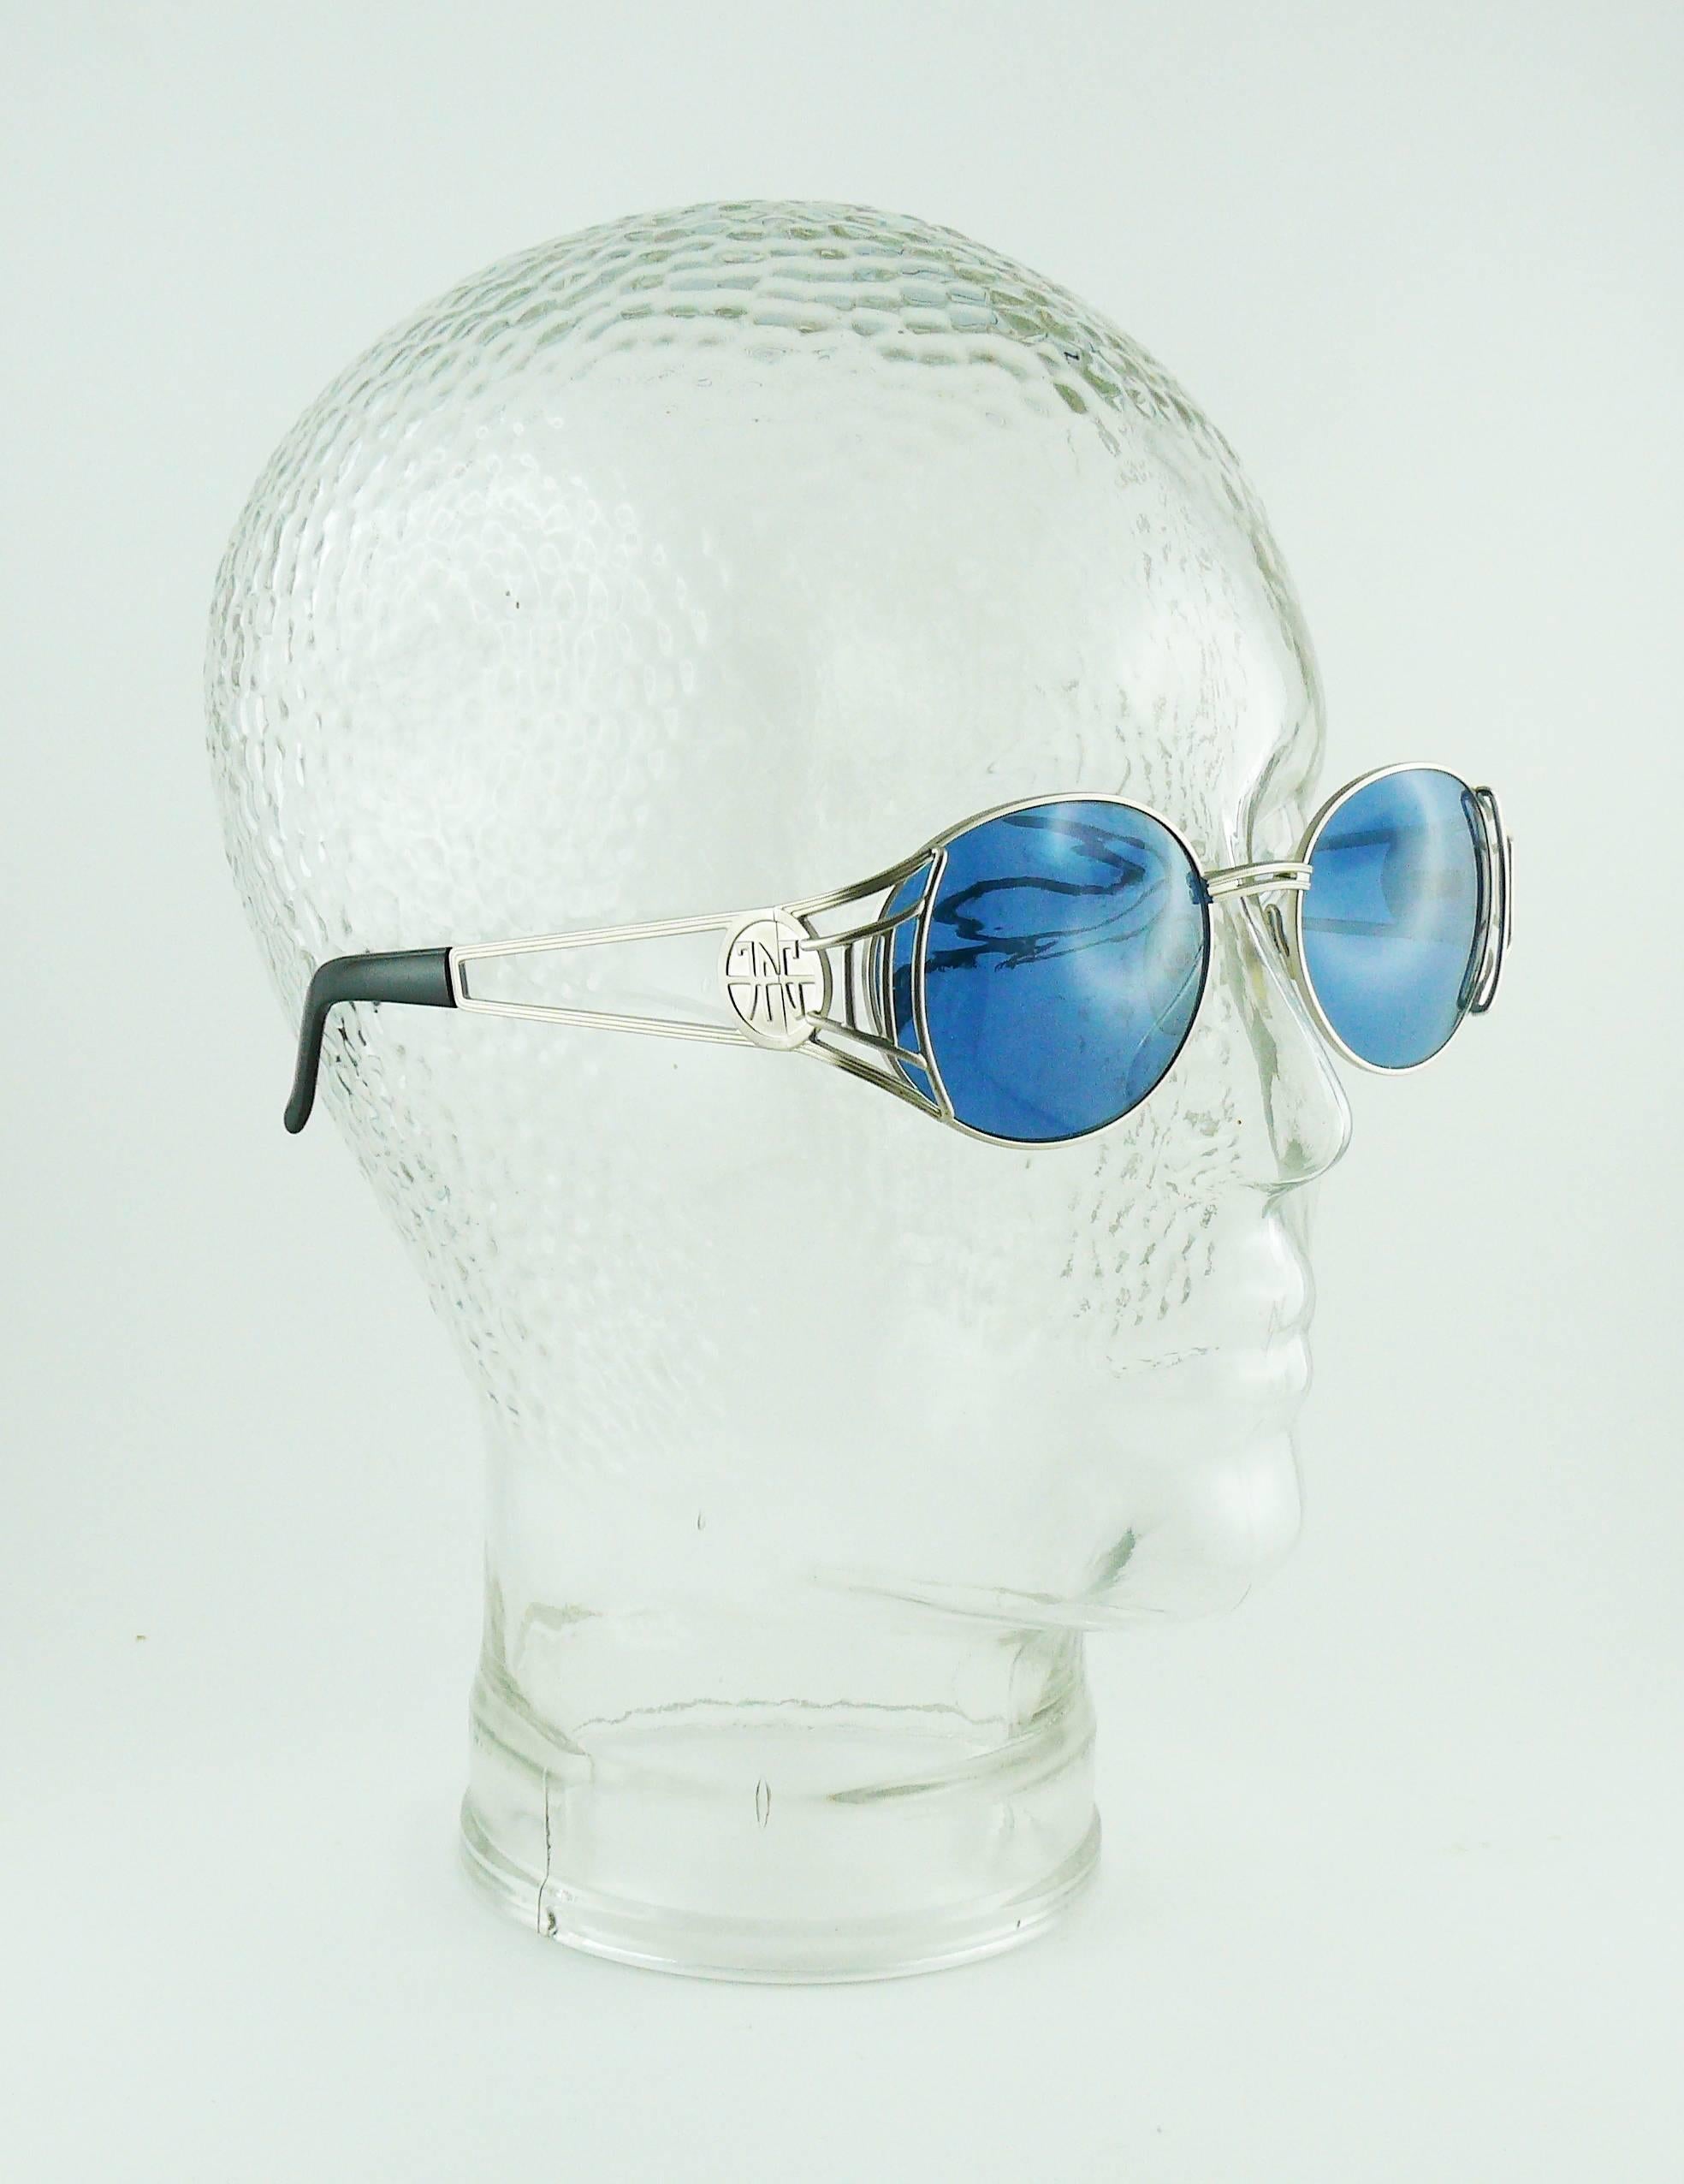 JEAN PAUL GAULTIER vintage sunglasses featuring matt silver tone frame finish embossed JPG and blue tinted lenses.

Embossed 58-6102.
Made in Japan.

Indicative measurements : max. width approx. 13.7 cm (5.39 inches) / width between lenses approx.